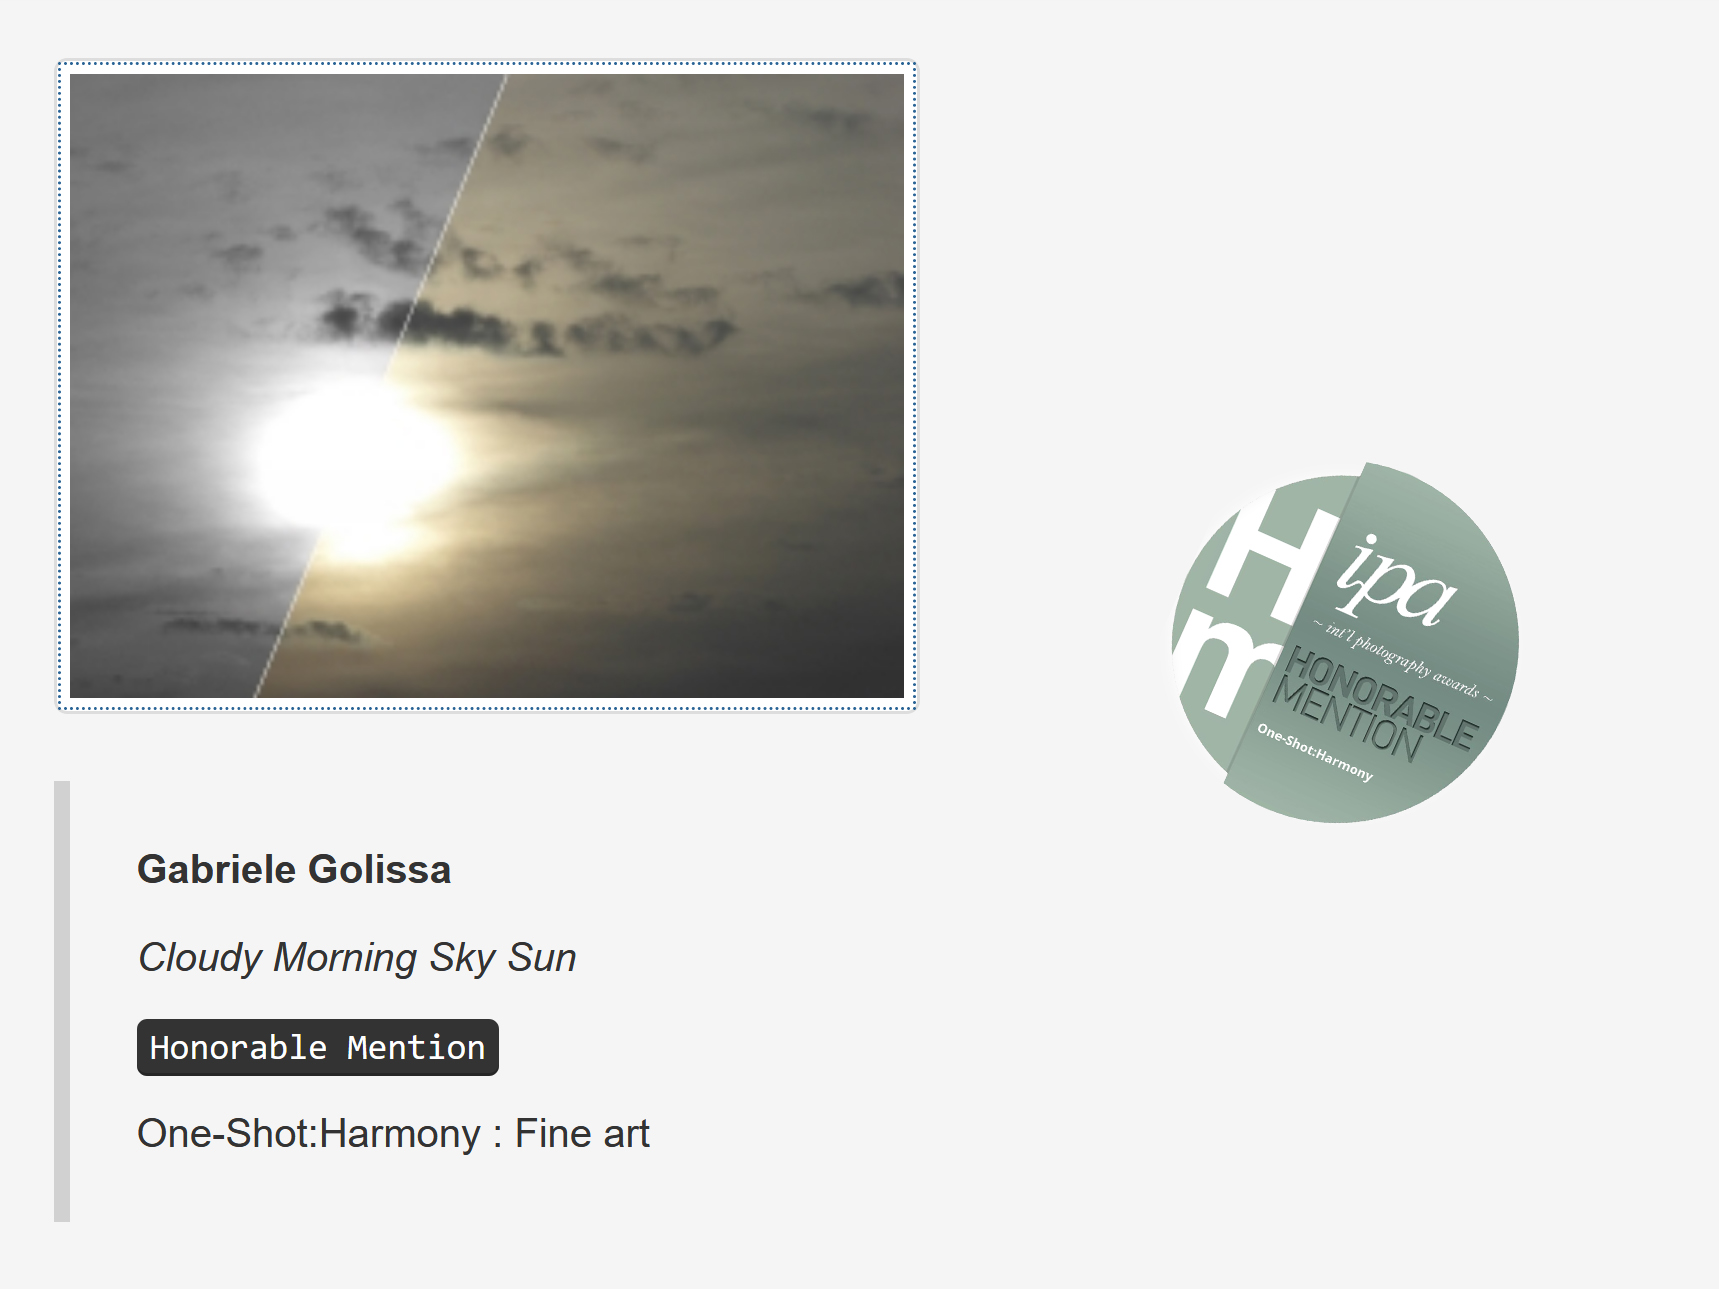 'Cloudy Morning Sky Sun' receives honorable mention @ One-Shot: Harmony